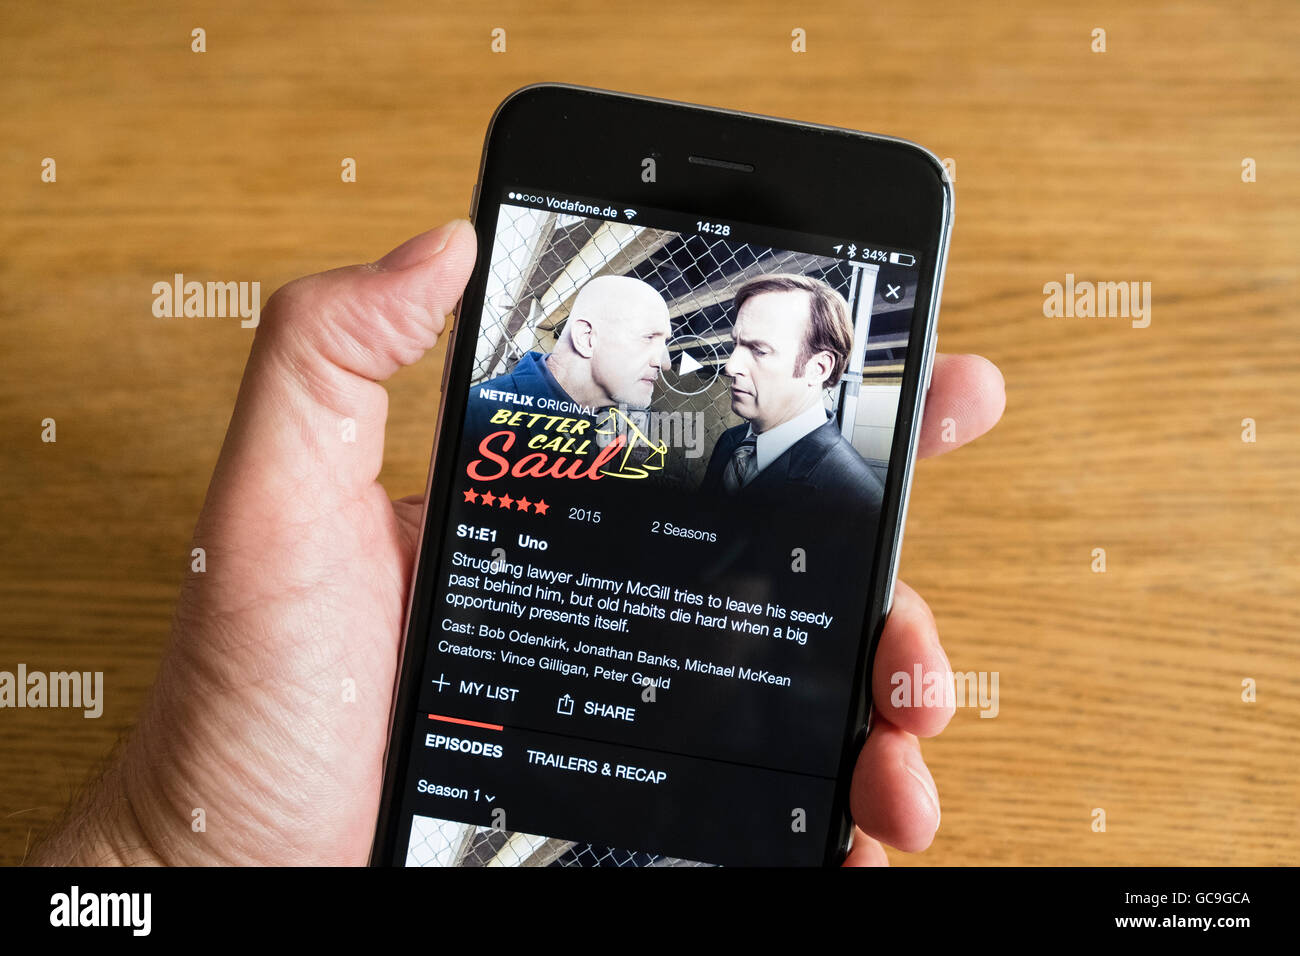 Netflix movie and TV media streaming app screen shown on an iPhone 6 smart phone Stock Photo